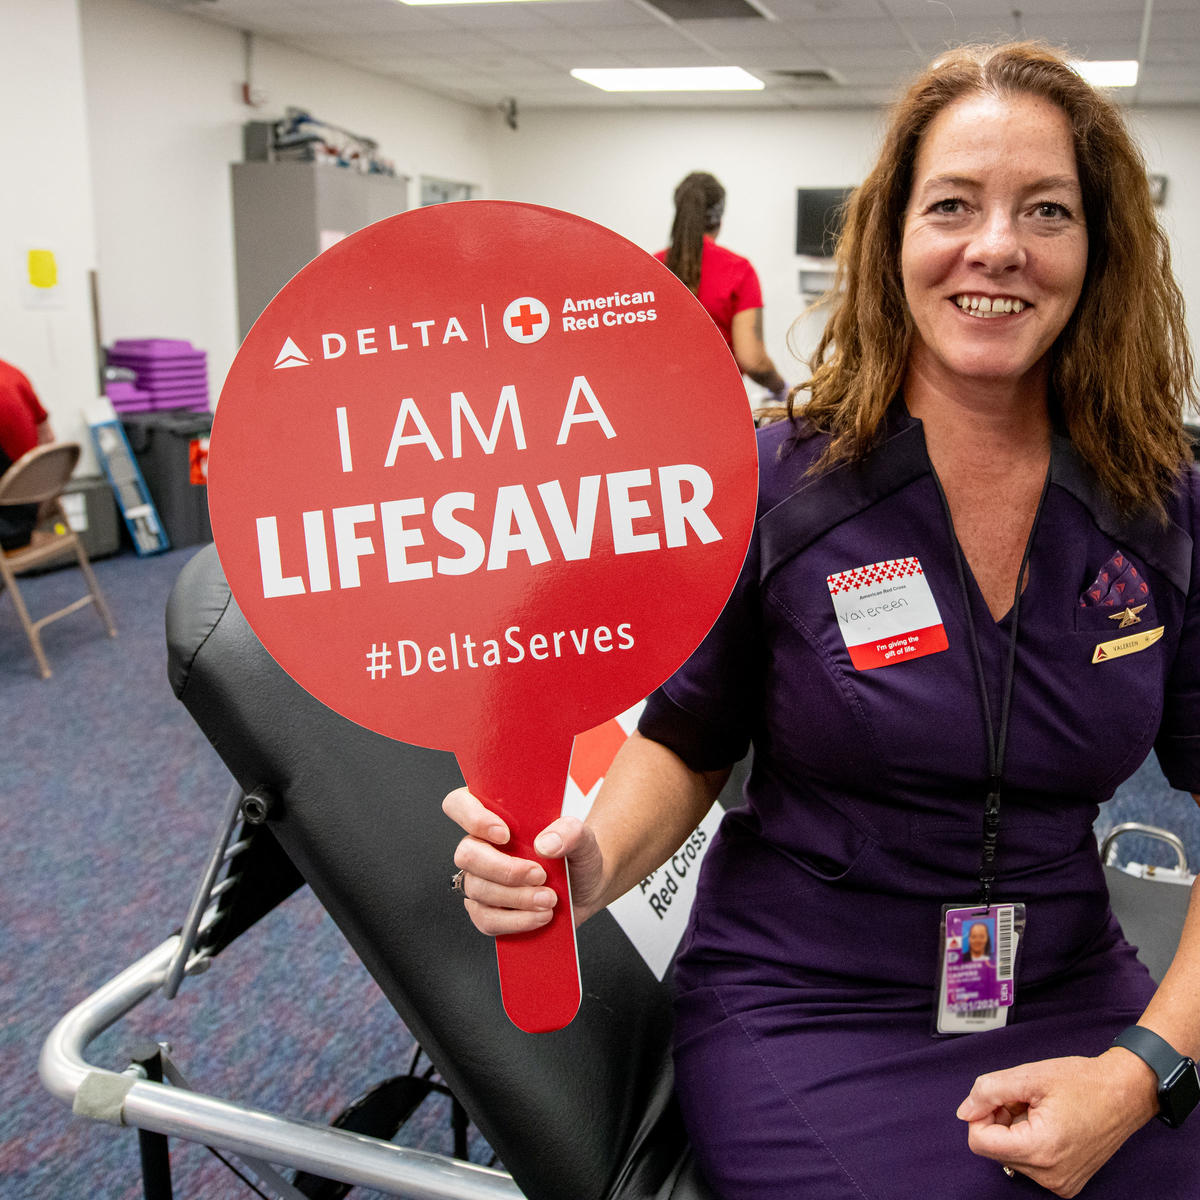 A Delta employee holds up a sign that says "I am a lifesaver" while giving blood.